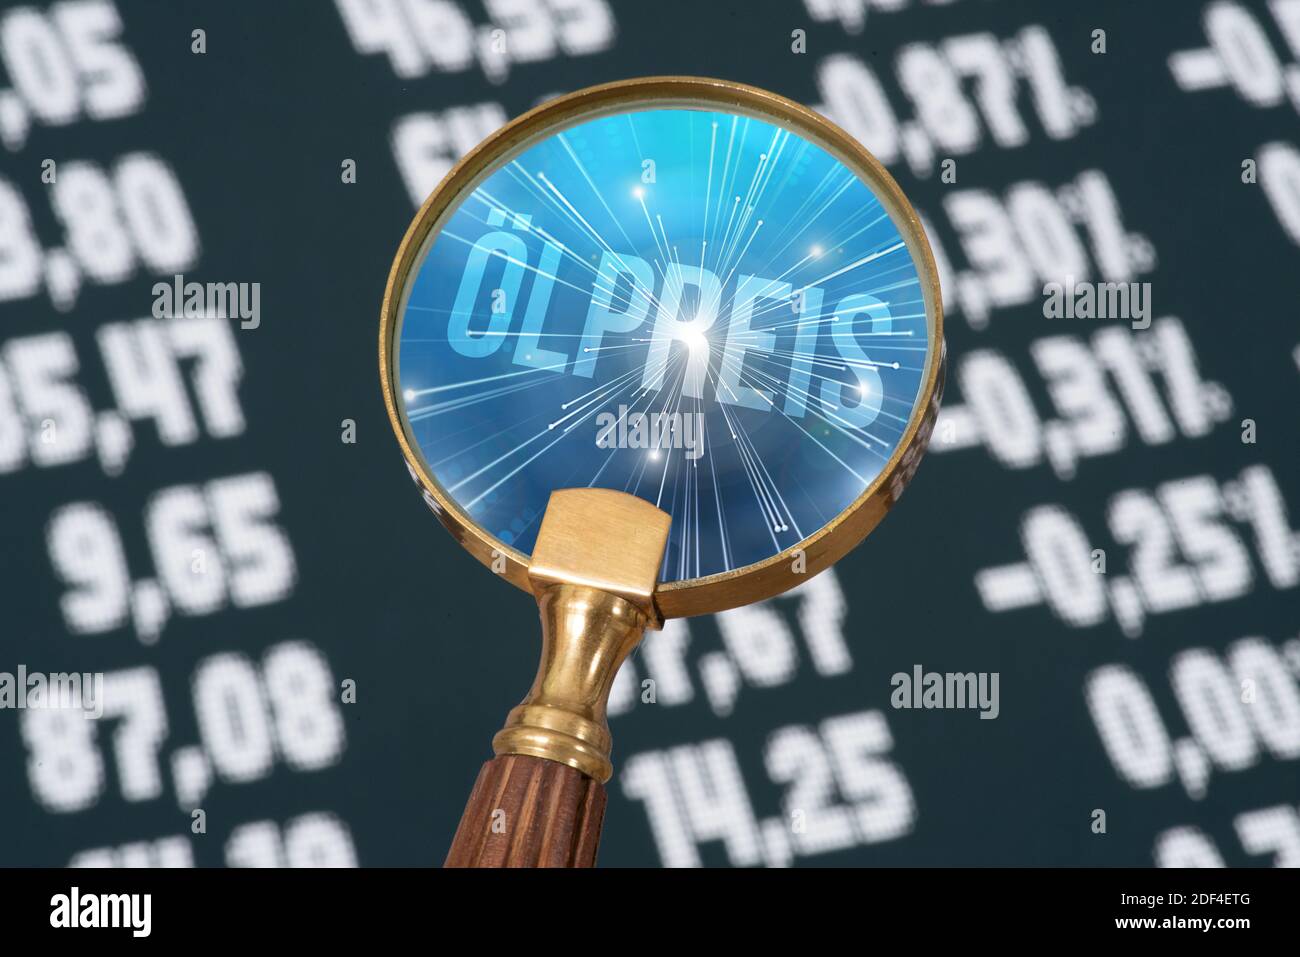 Stock market, magnifying glass and price of crude oil Stock Photo